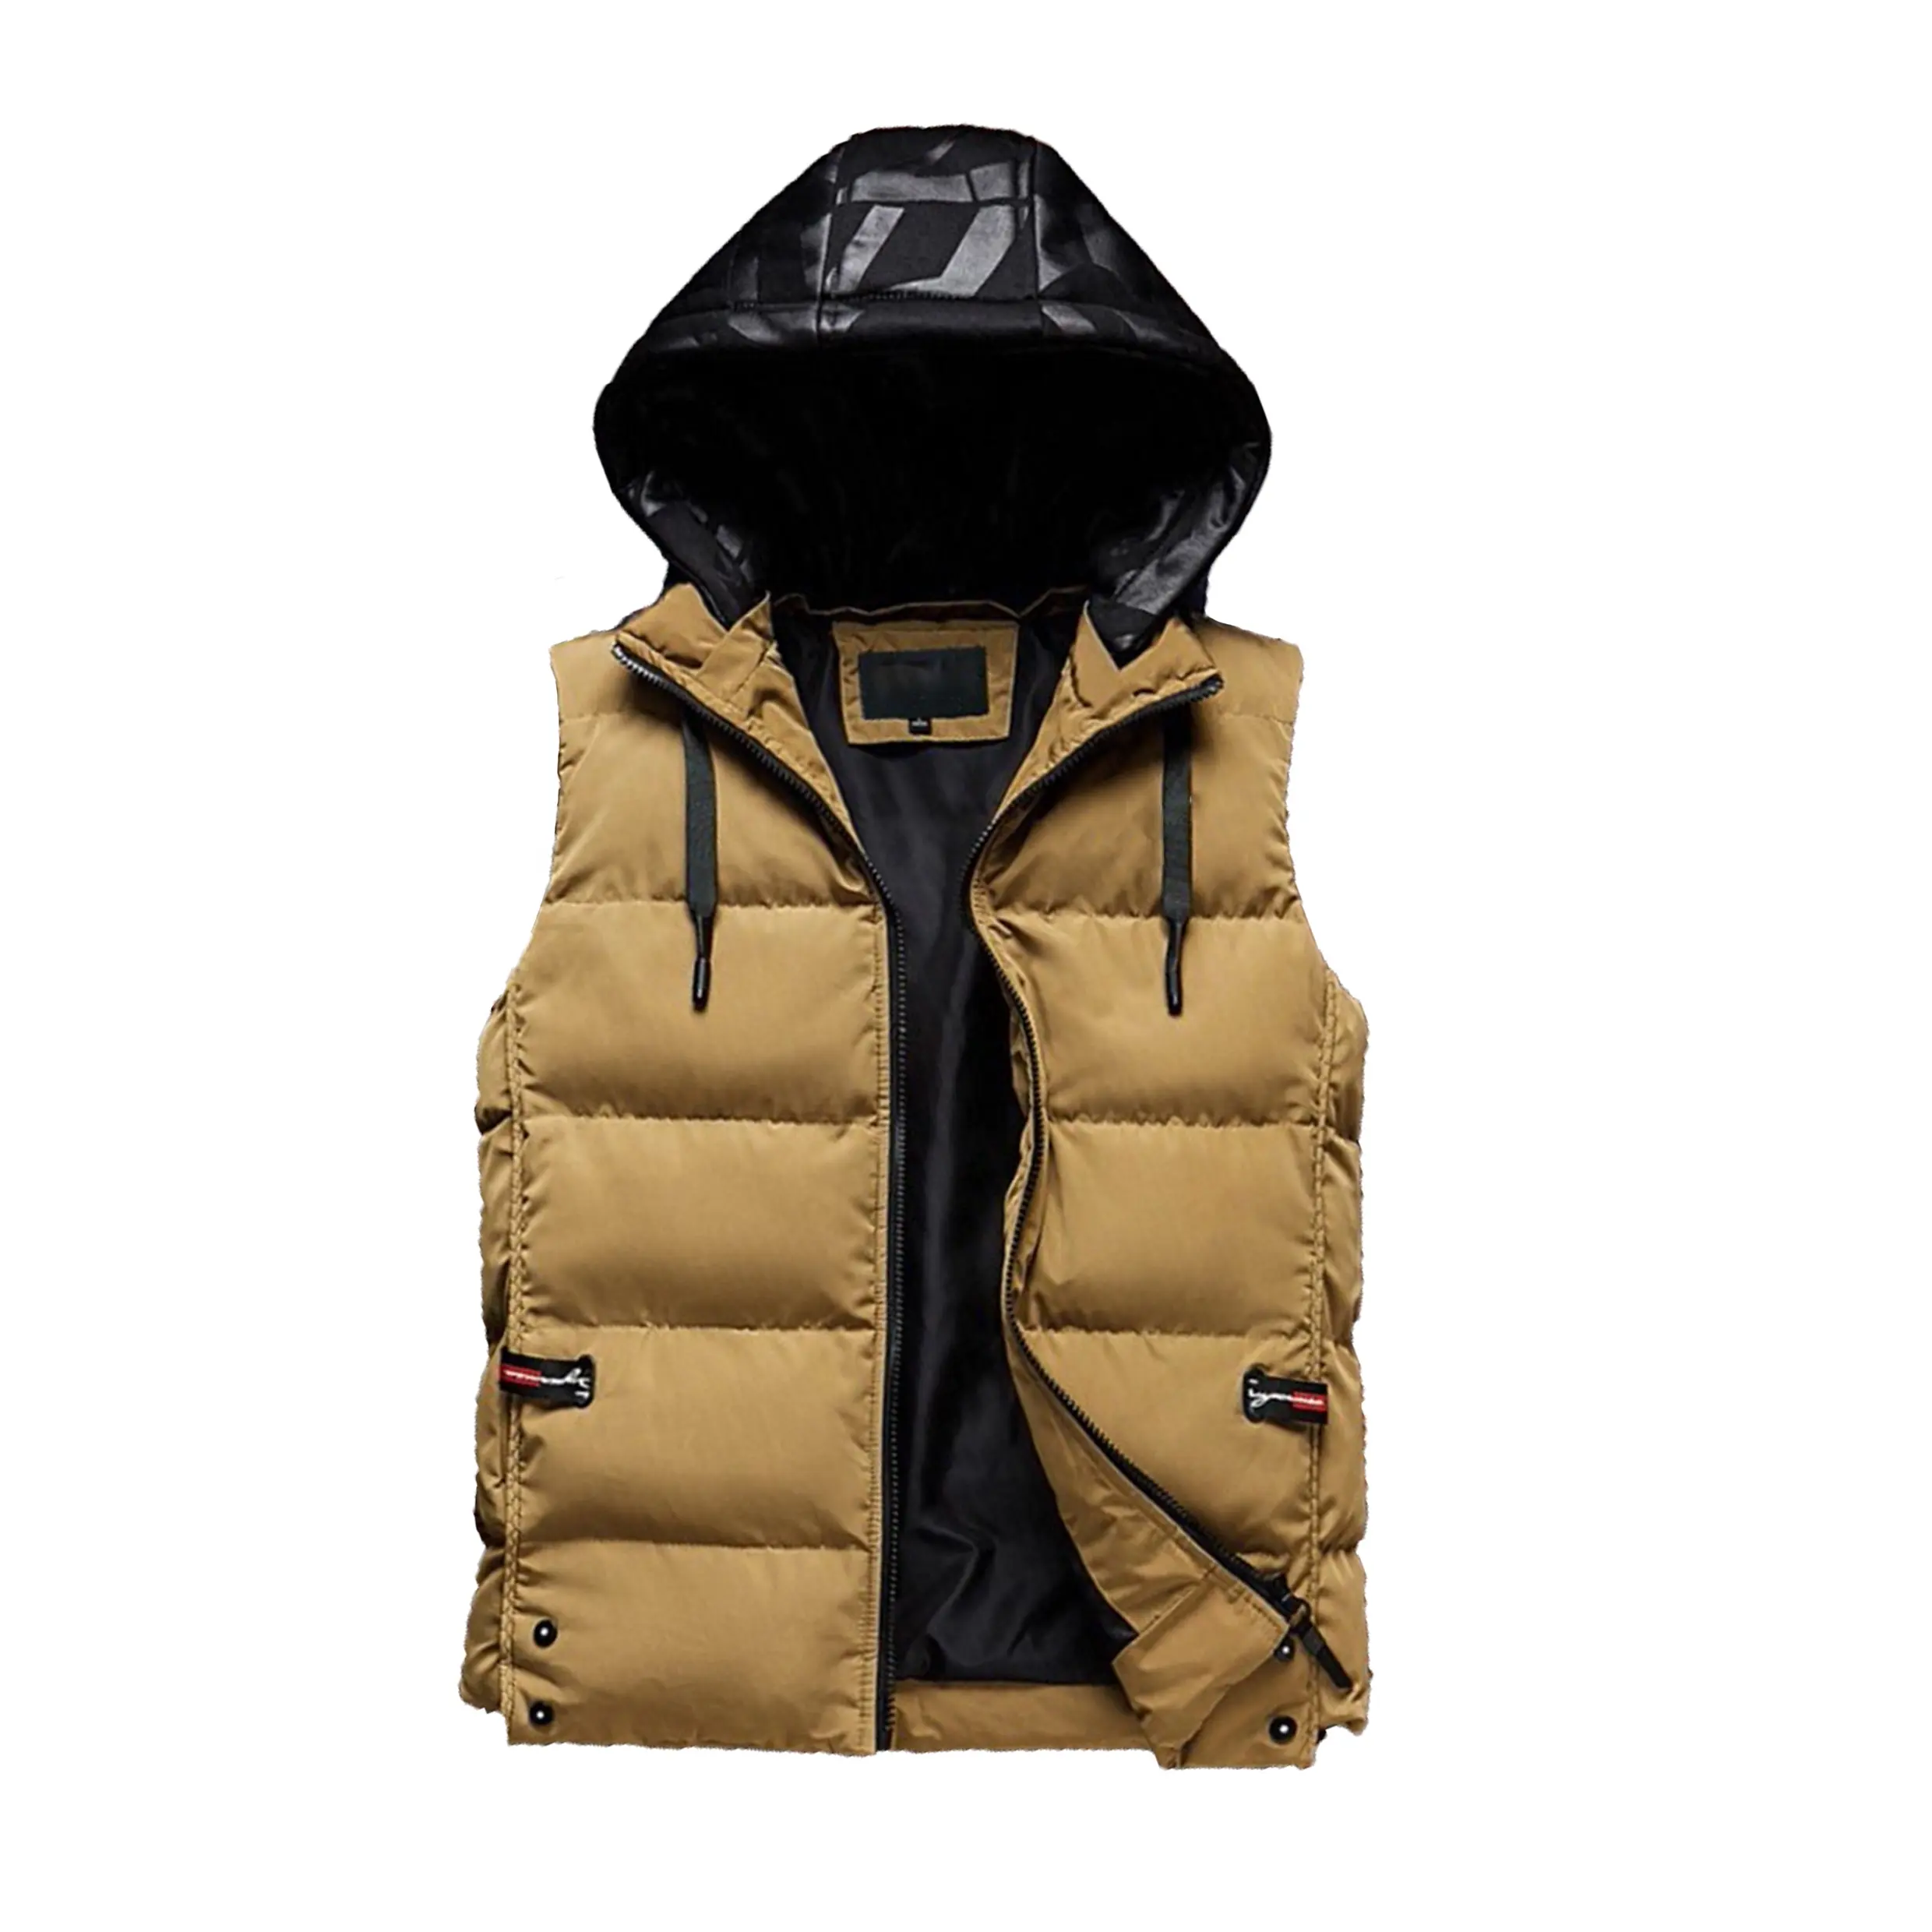 Utility men's waistcoat outwear warm puffer padding vest wholesale Quilted chaquetas para hombre